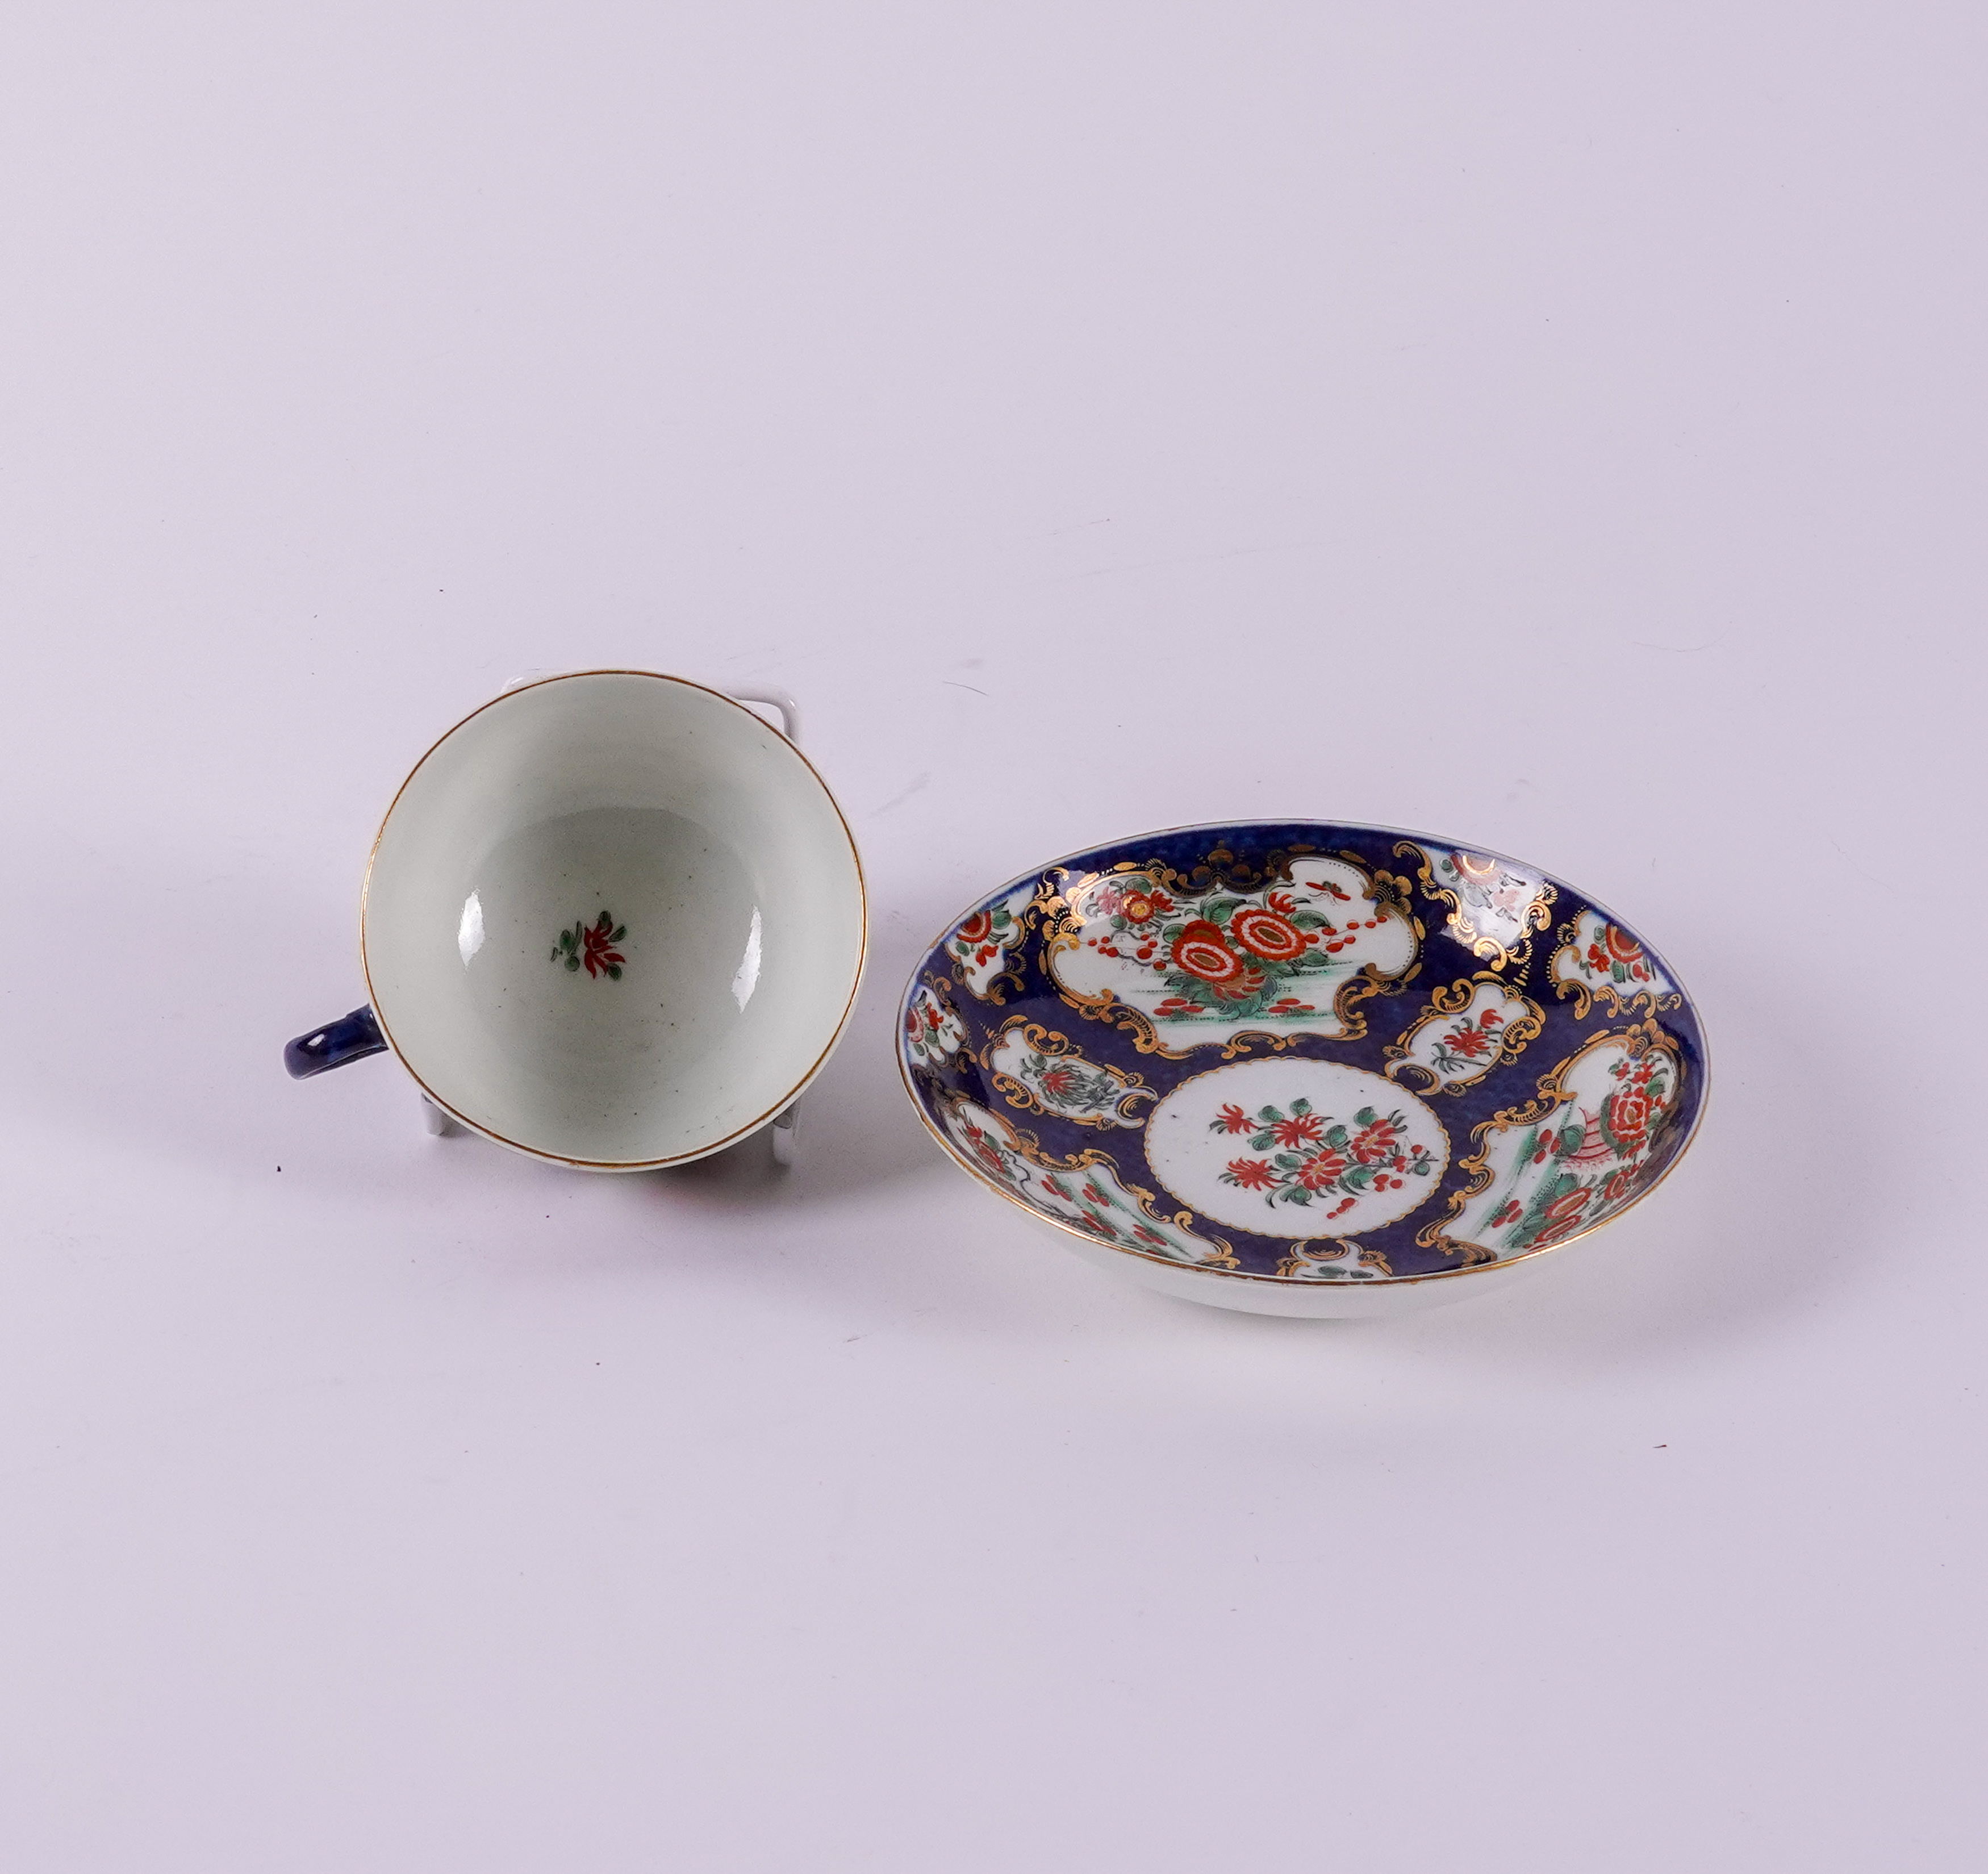 A WORCESTER BLUE-GROUND TEACUP AND SAUCER (4) - Image 6 of 6